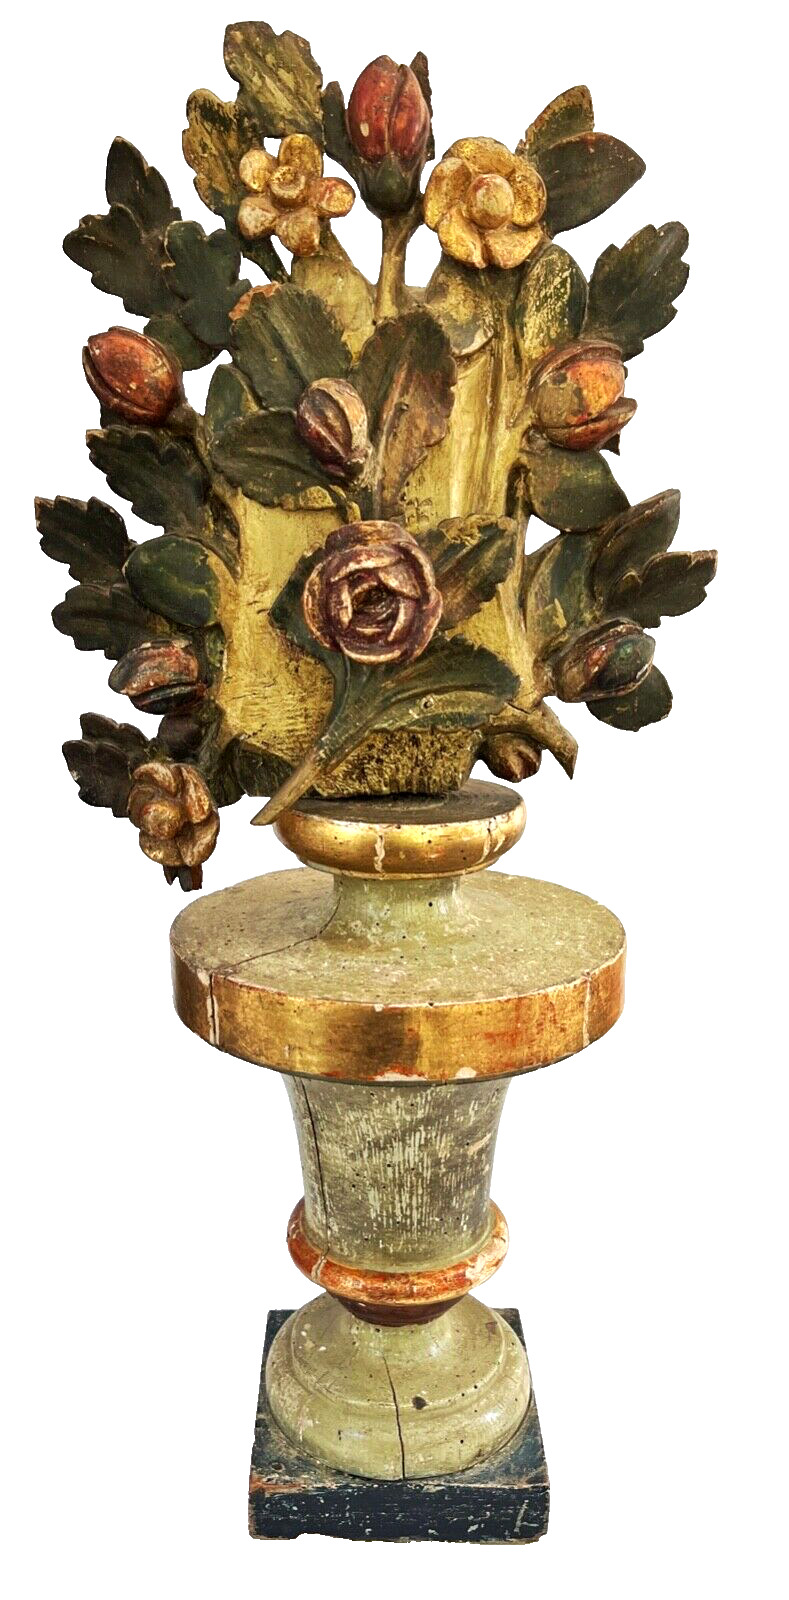 Antique 19thC Italian Carved Wood Gold Gilt W/Polychrome Carved Floral URN 1820s